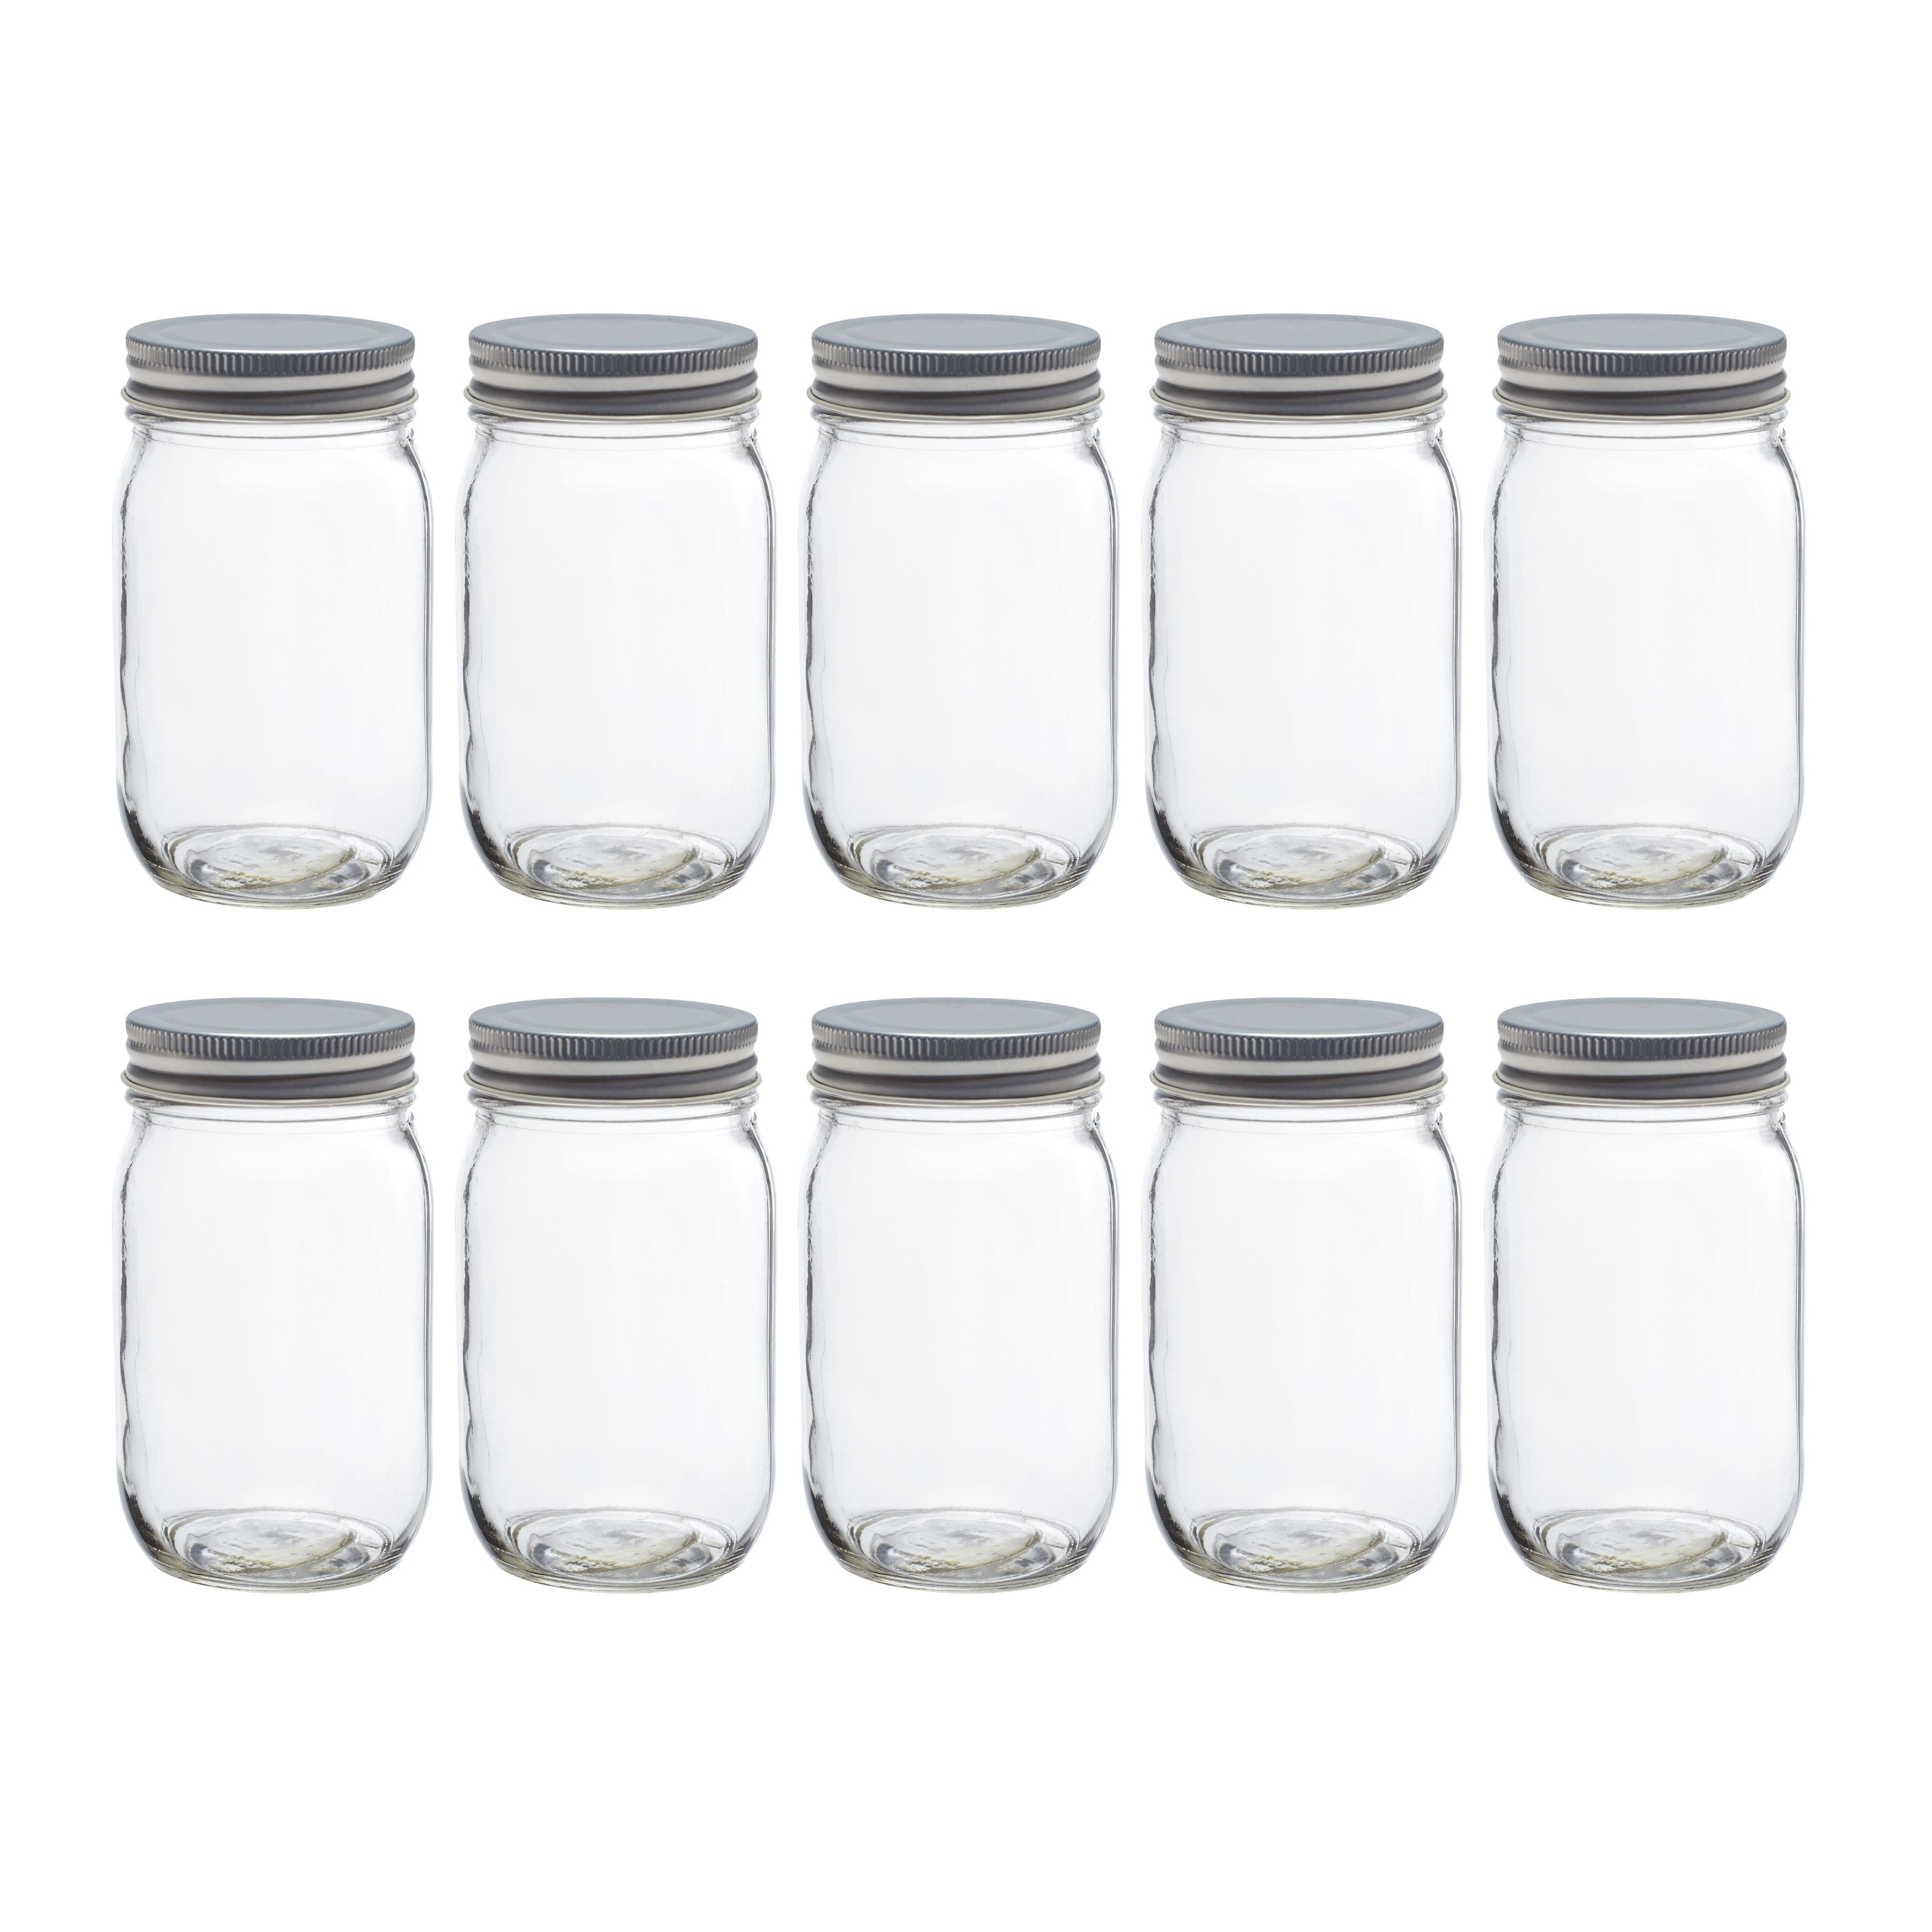 DISCOUNT PROMOS Mason Jars with Lids 16 oz. Set of 10, Bulk Pack - Glass  Jars for Overnight Oats, Candies, Fruits, Pickles, Spices, Beverages -  Black